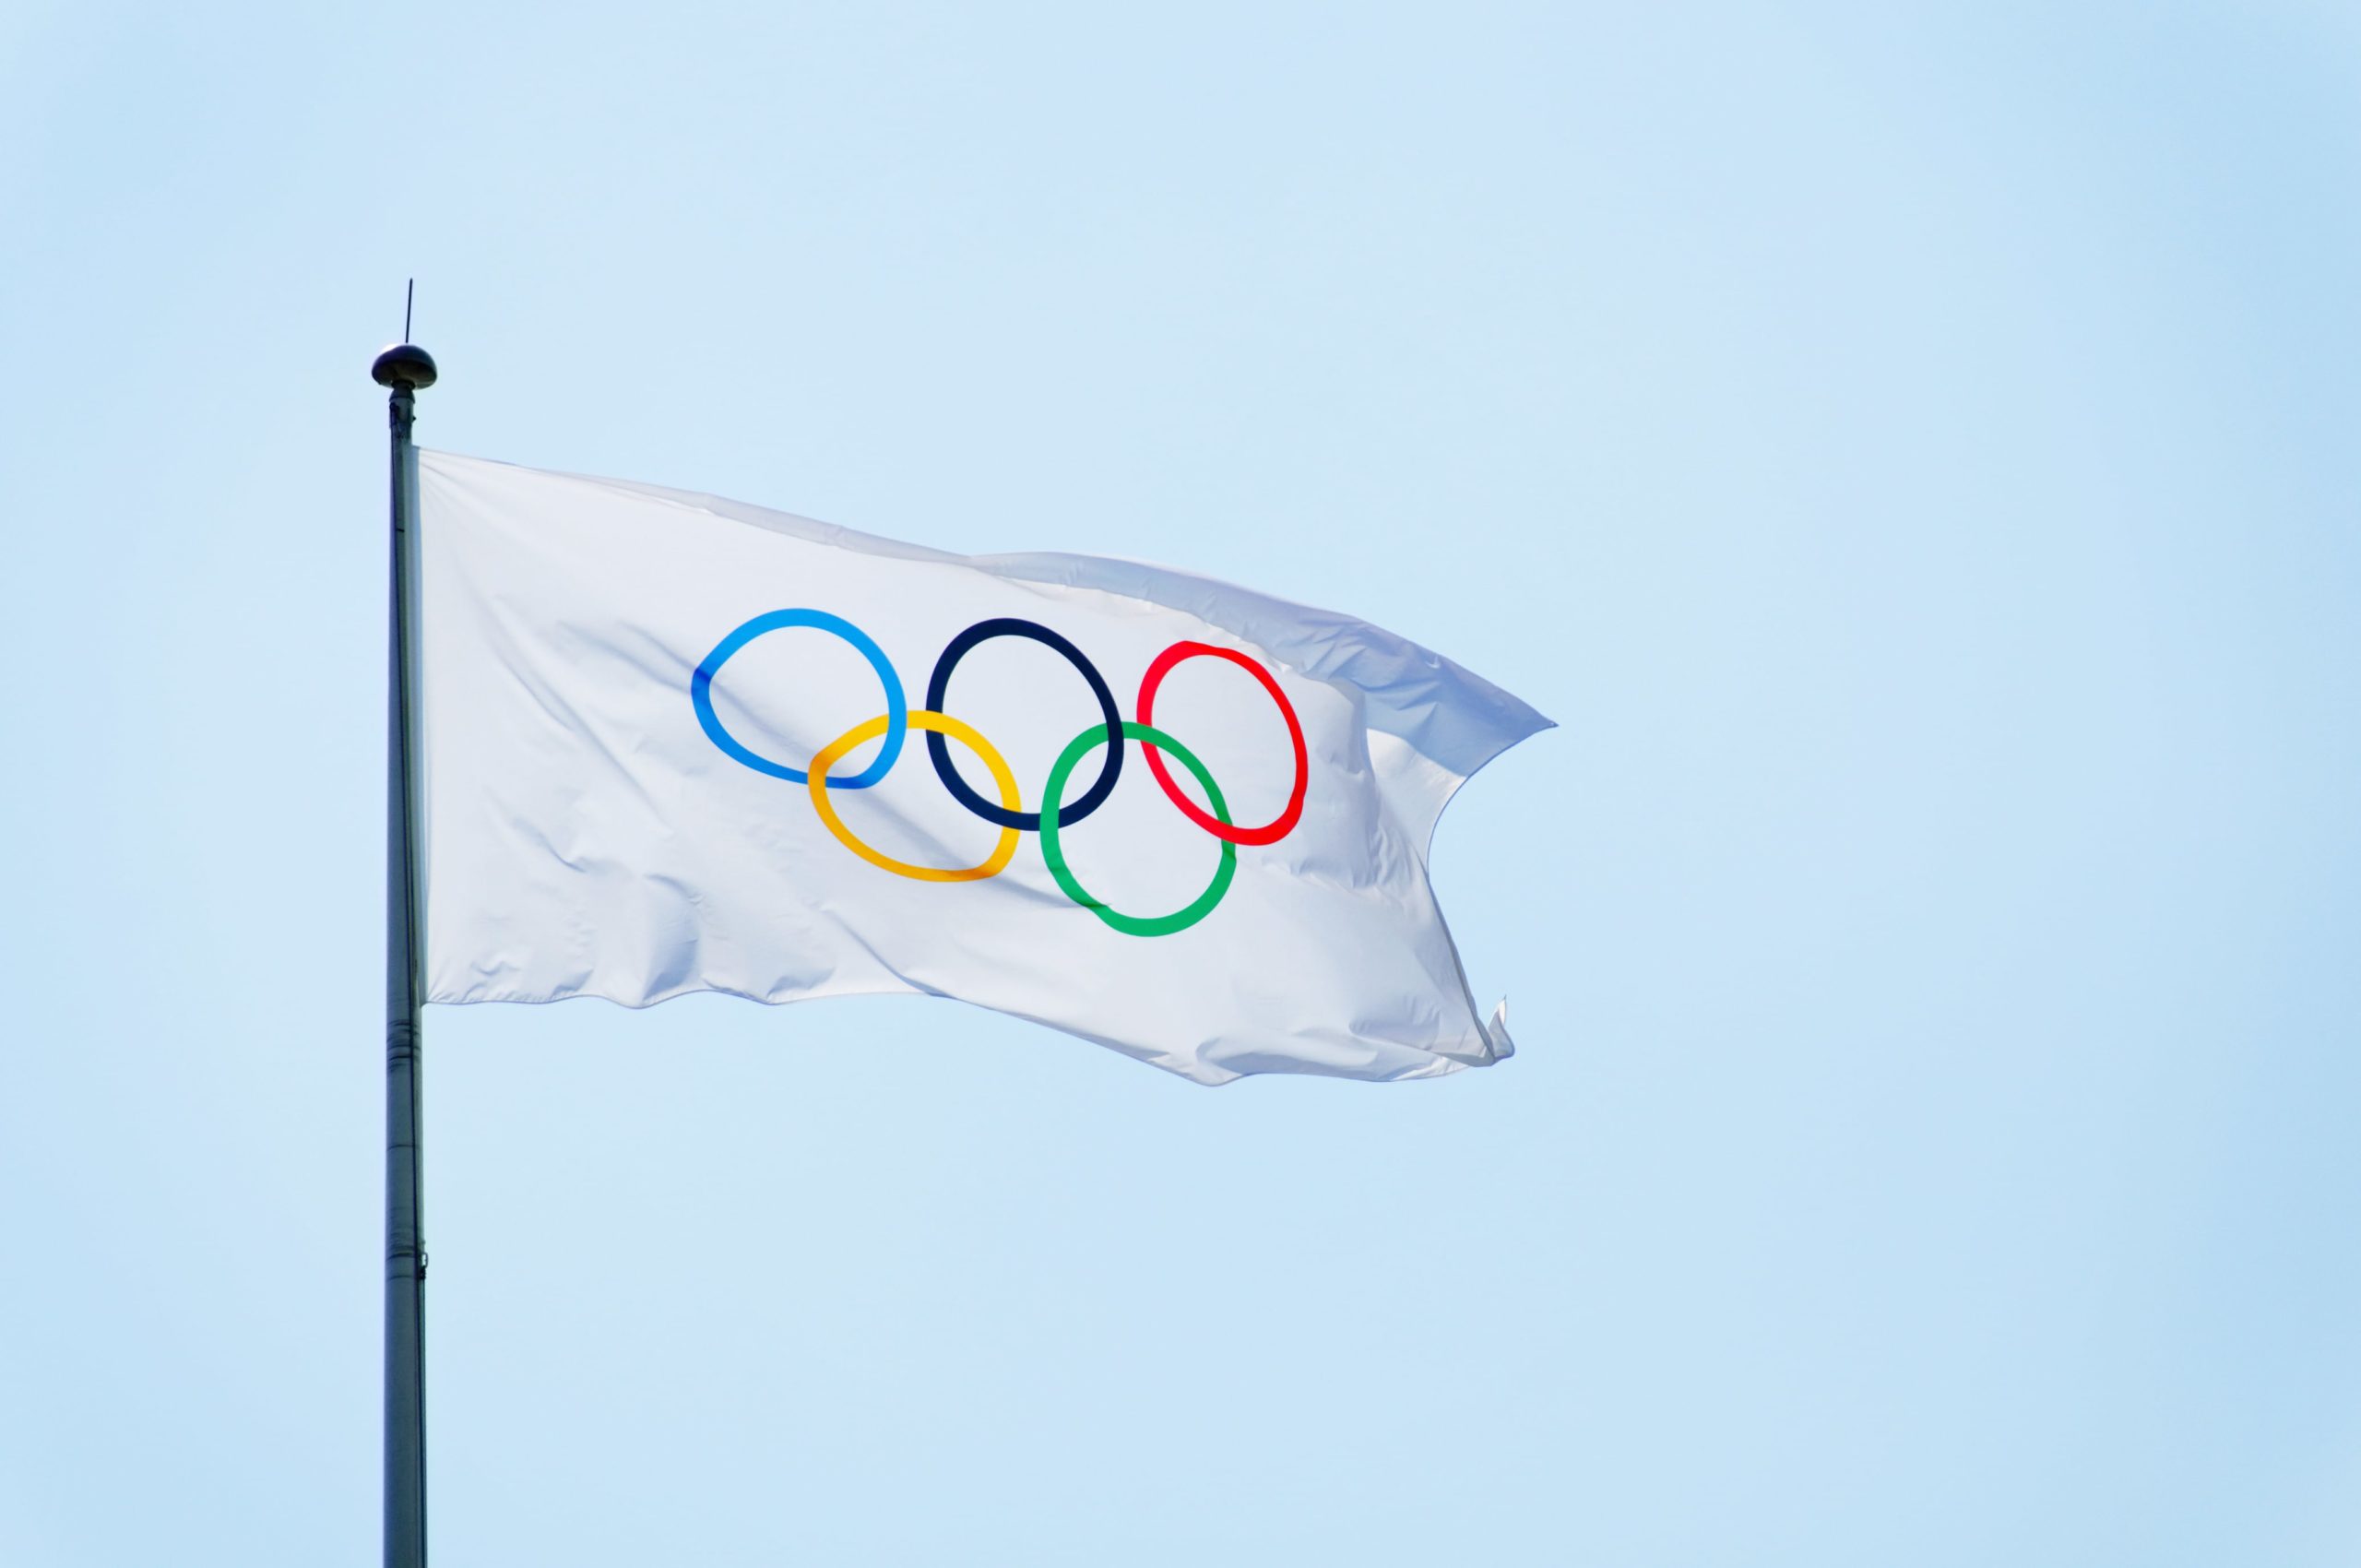 the origin of the olympic flag dates all the way back to 1914